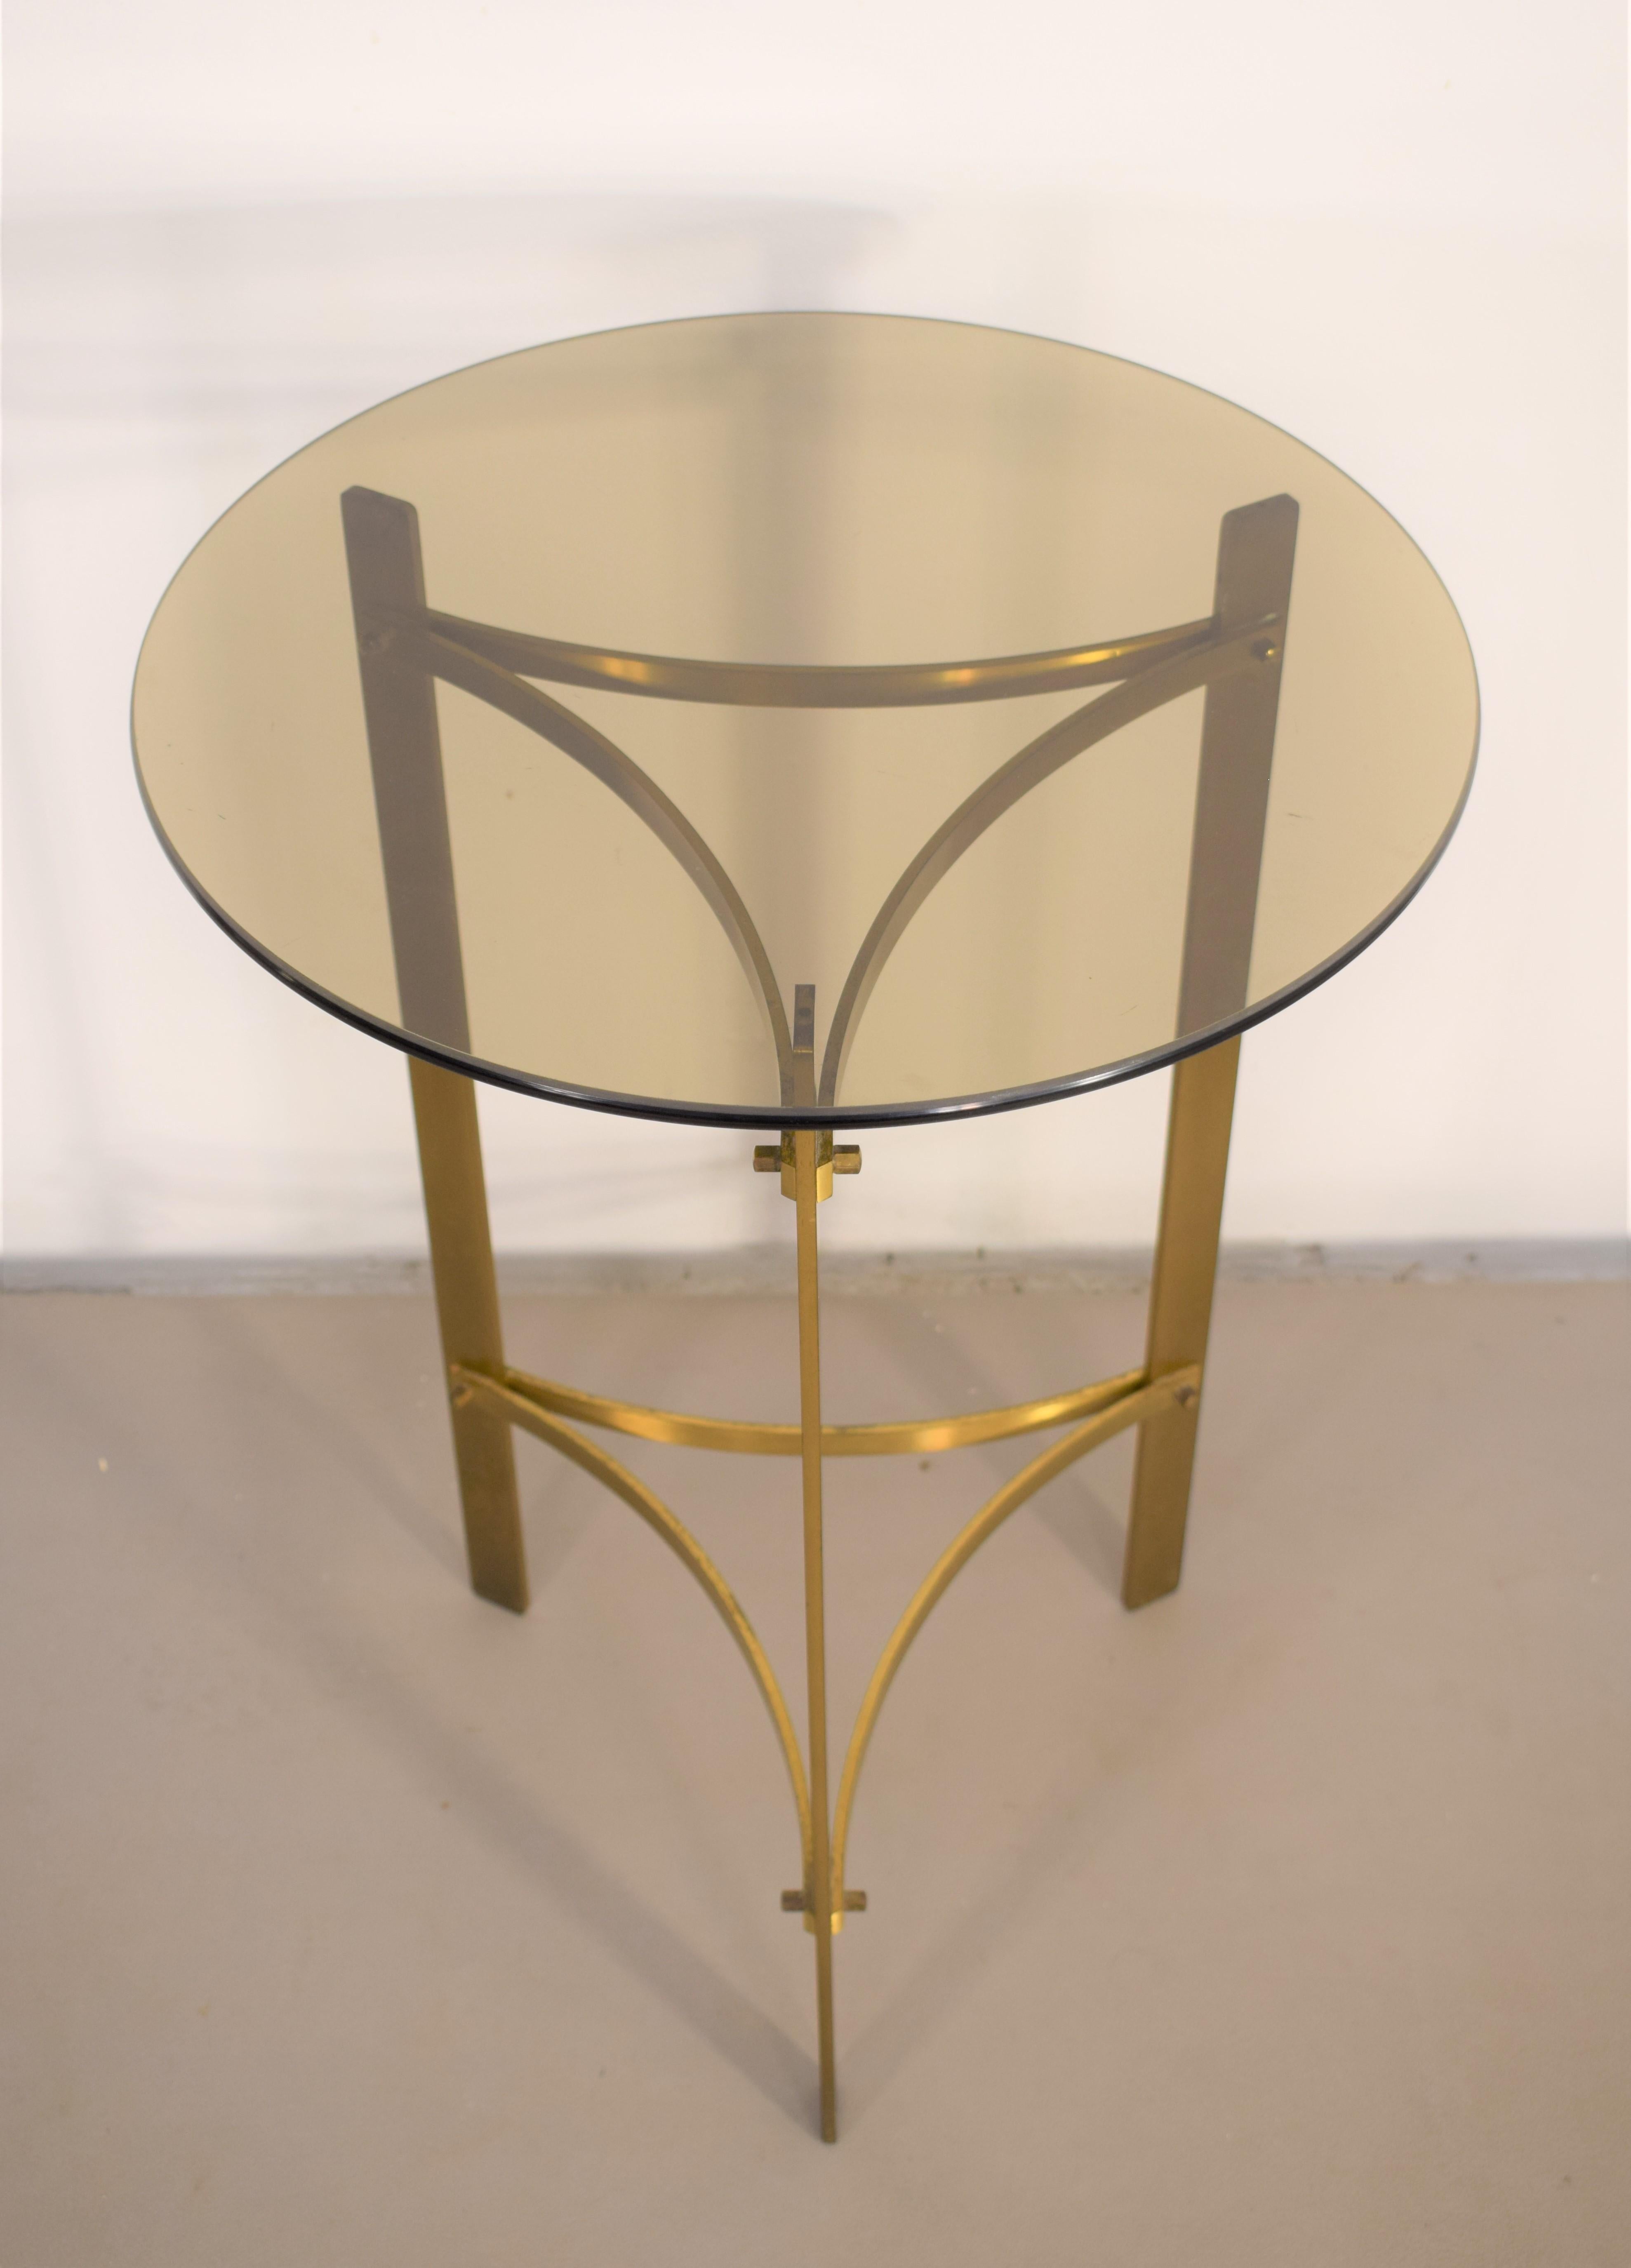 Italian round coffee table, brass and smoked glass, 1960s.

Dimensions: H= 61 cm; D= 44 cm.